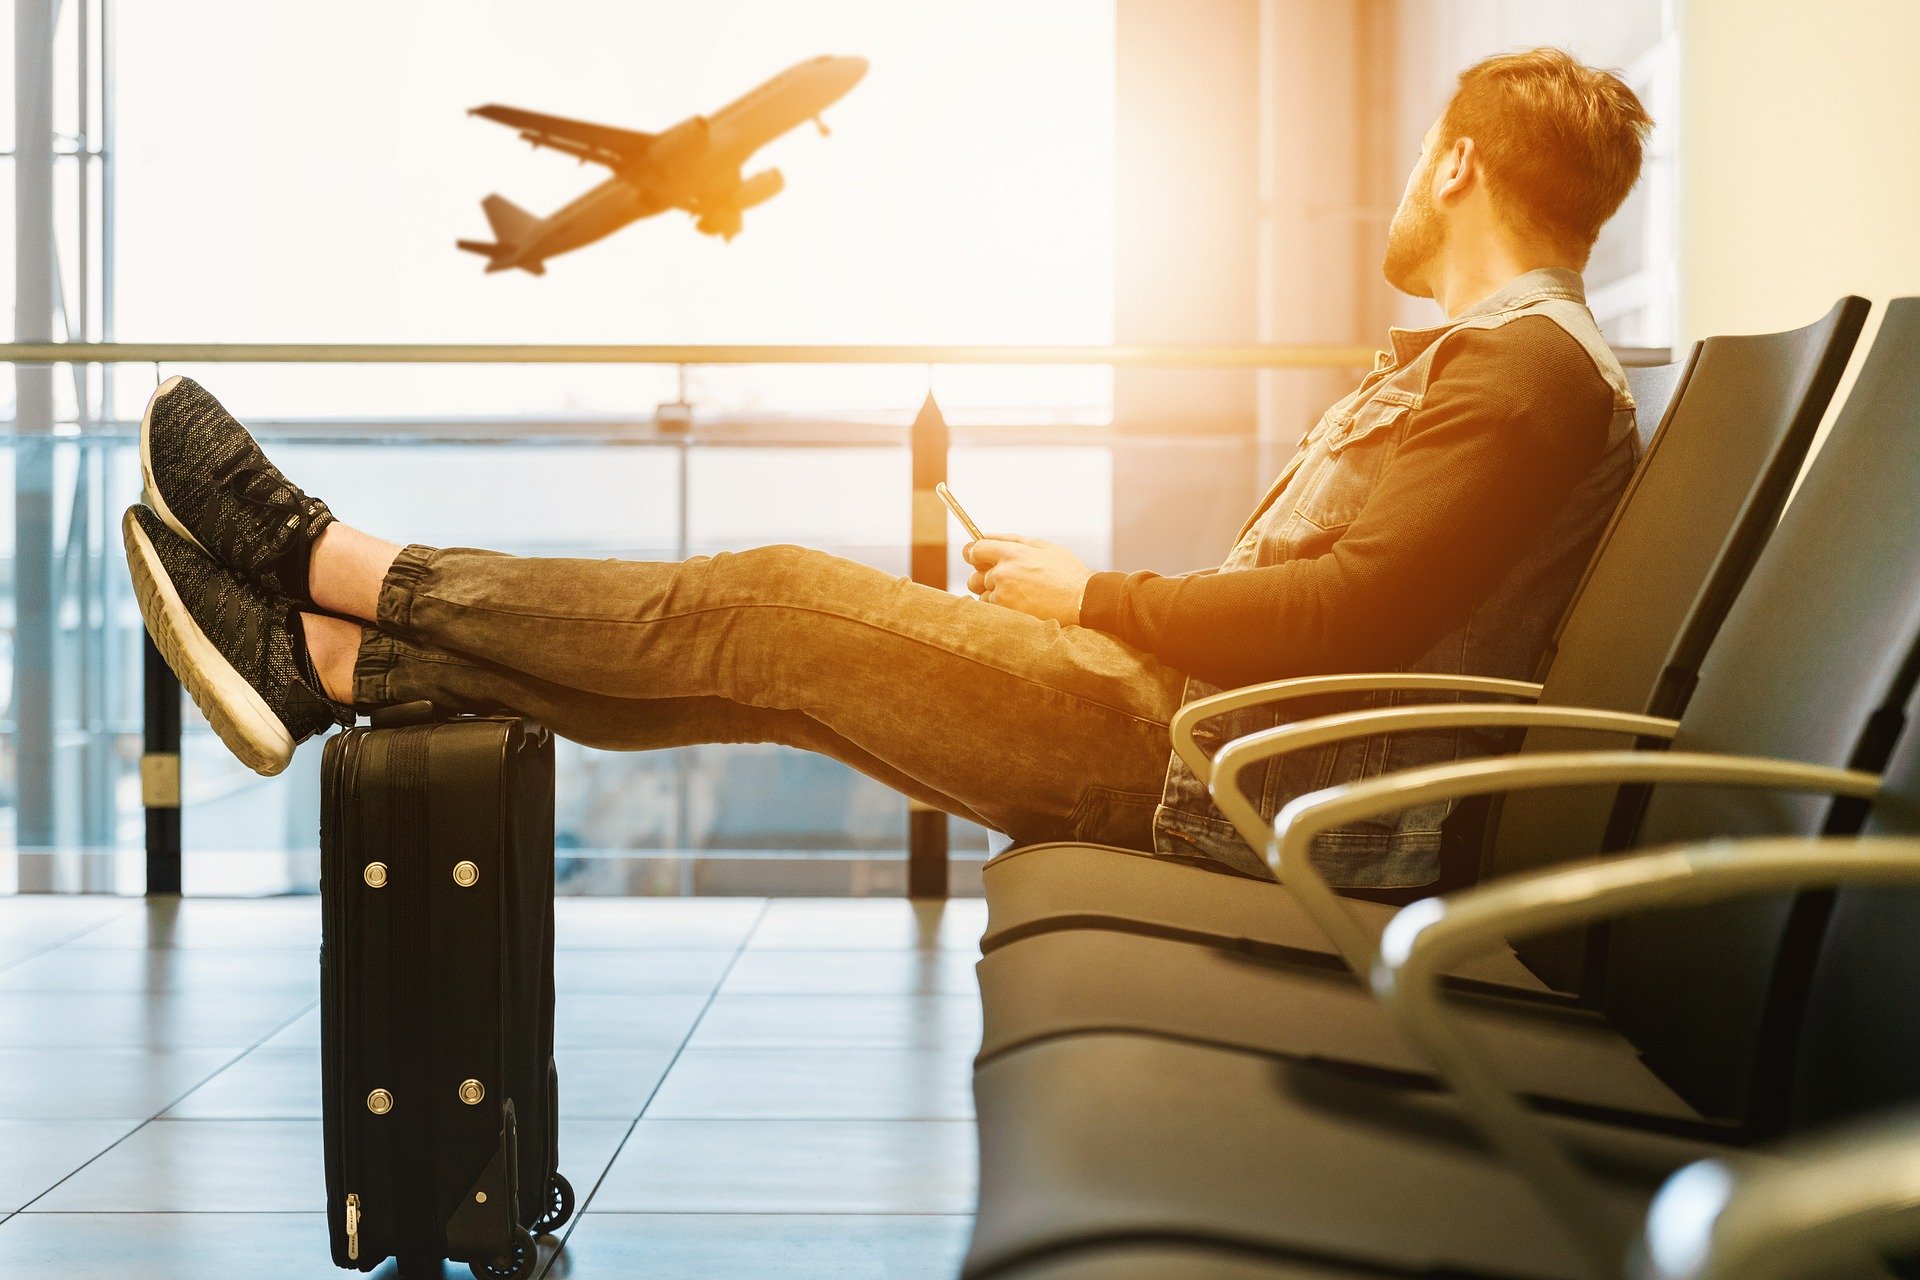 How the Travel Loyalty industry responds will create a lasting impact on their customer loyalty initiatives.